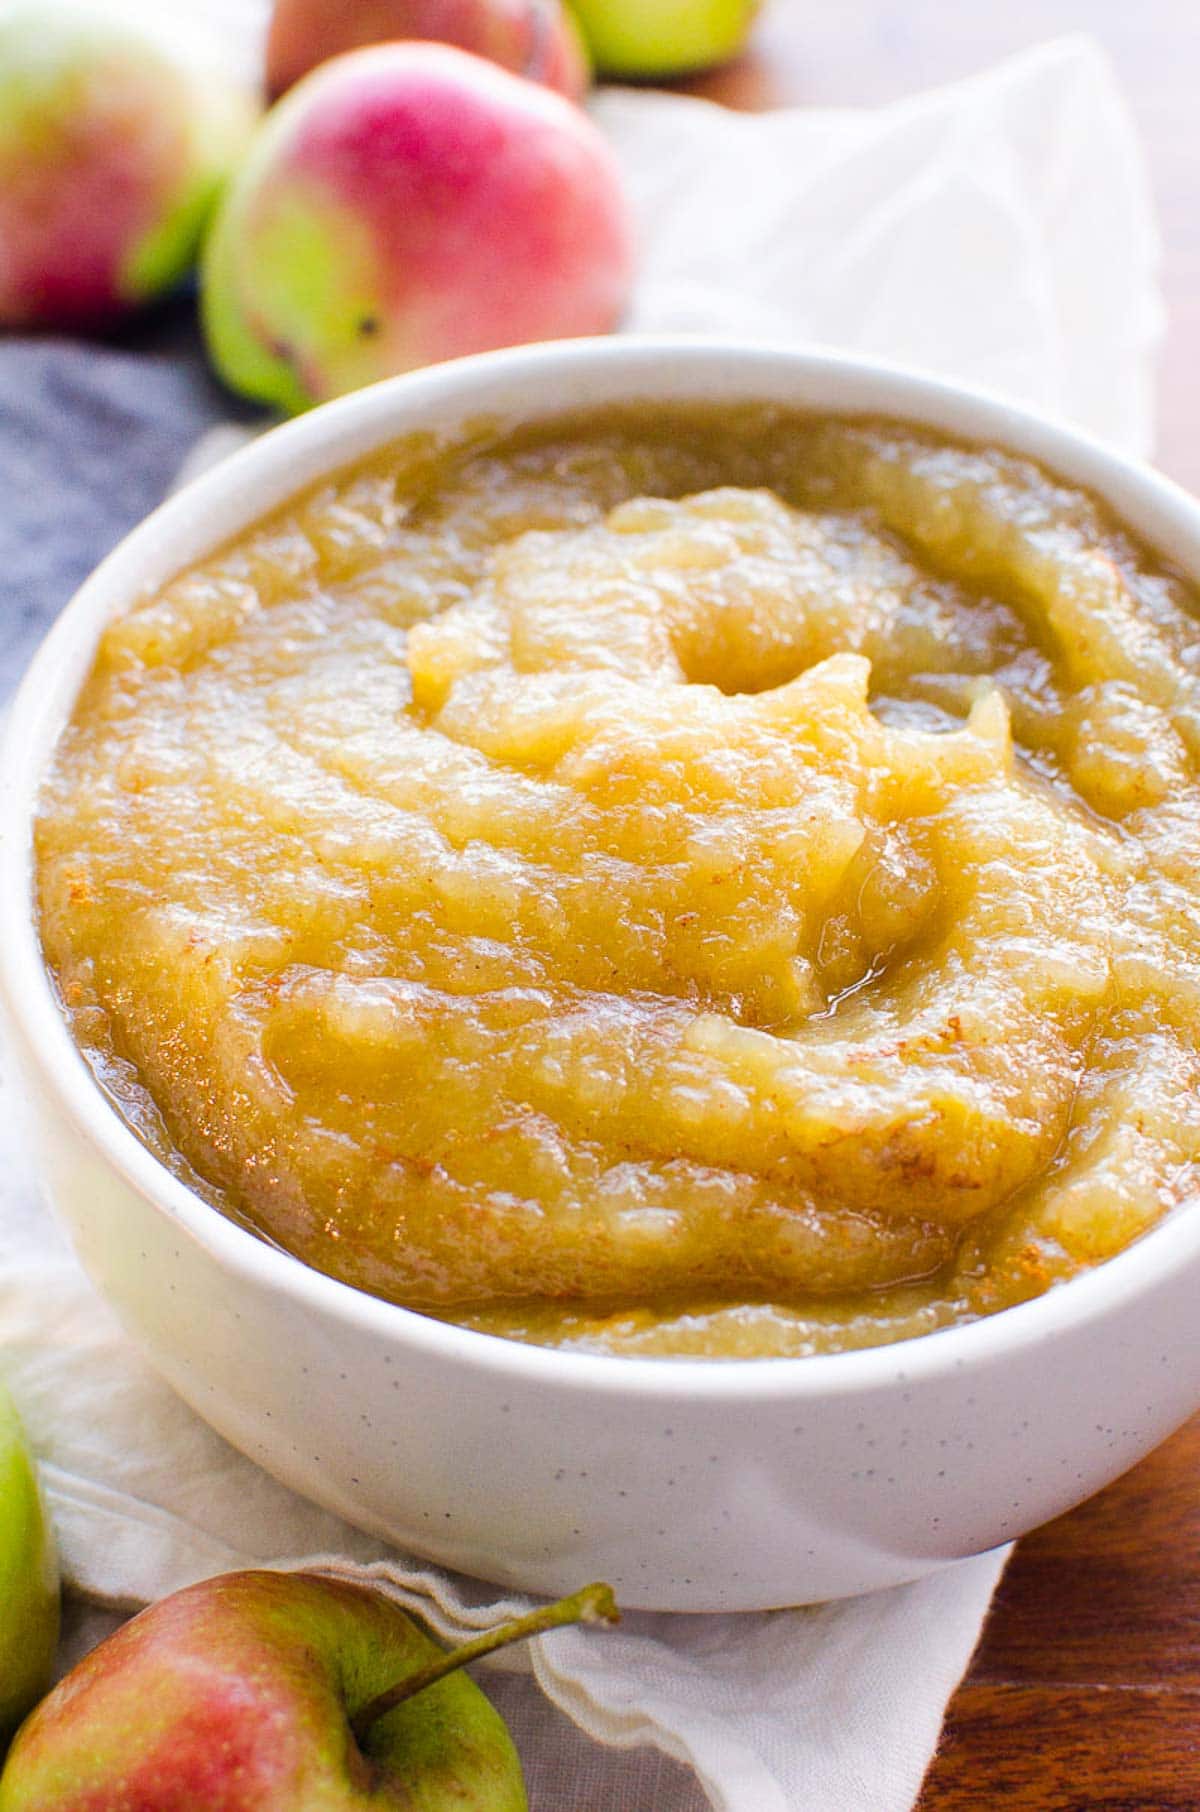 Instant Pot applesauce in a bowl with some fresh apples nearby.